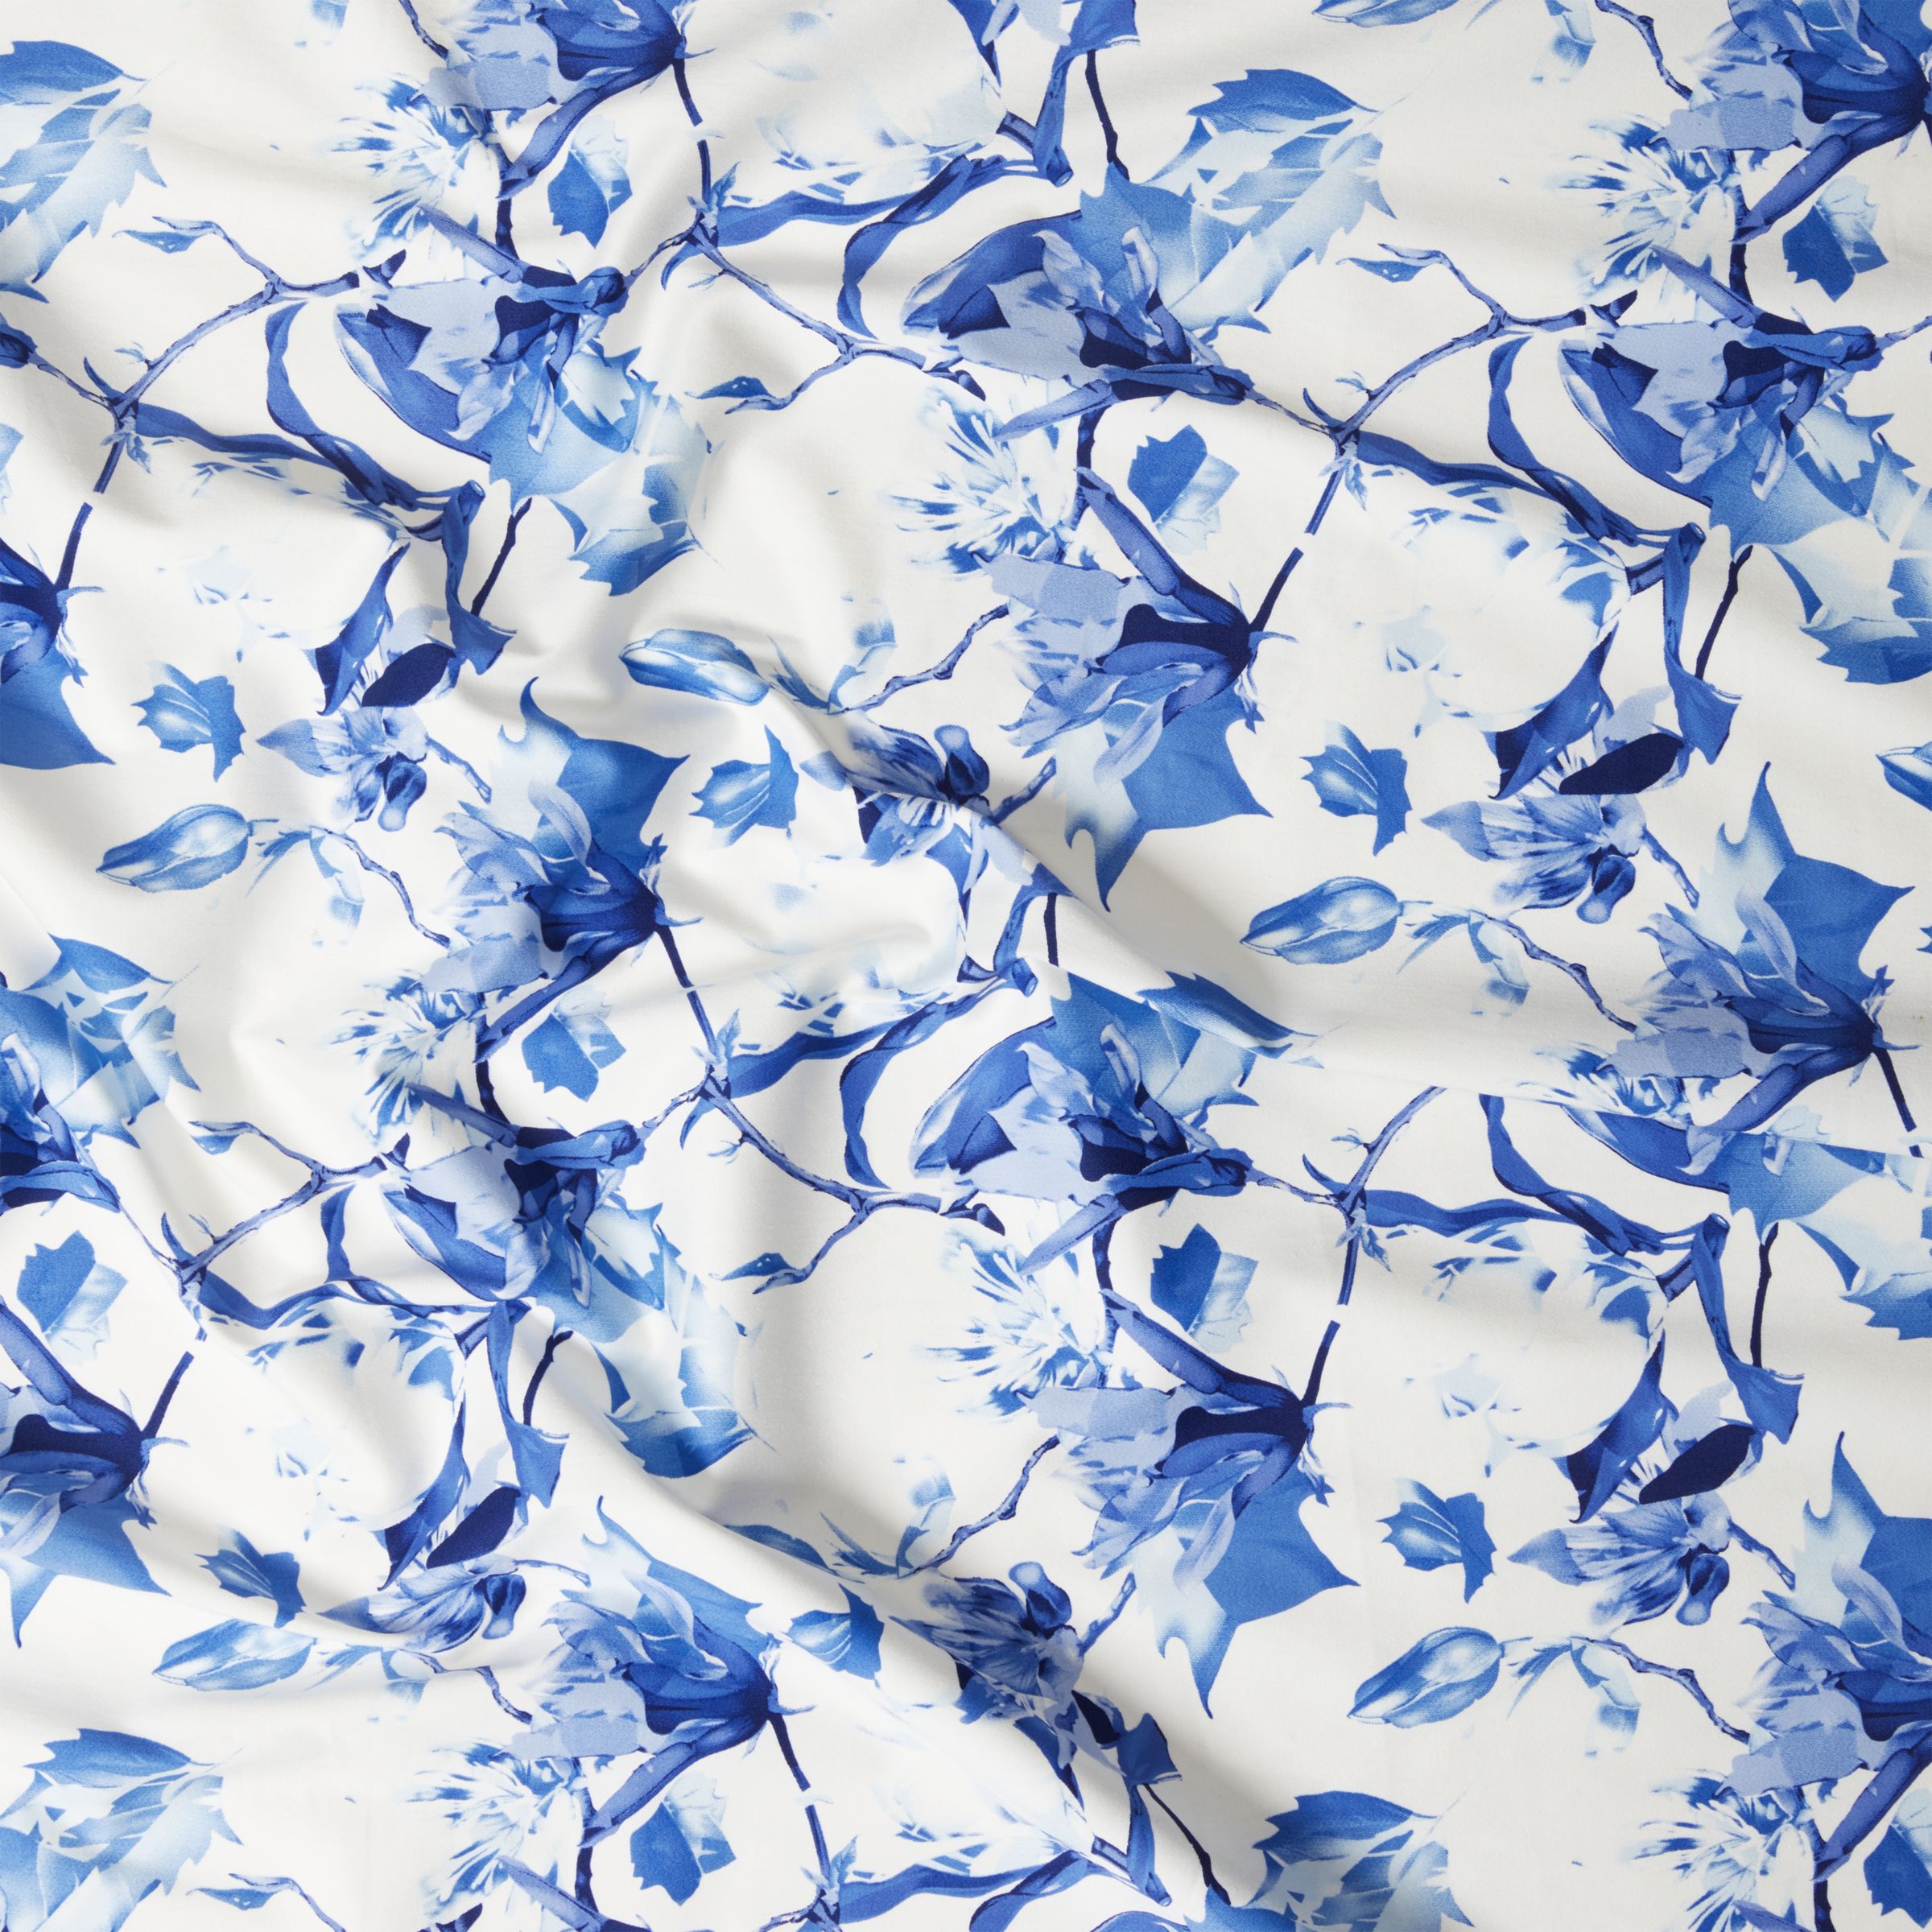 Viscount Textiles Large Lily Print Fabric, White/Blue